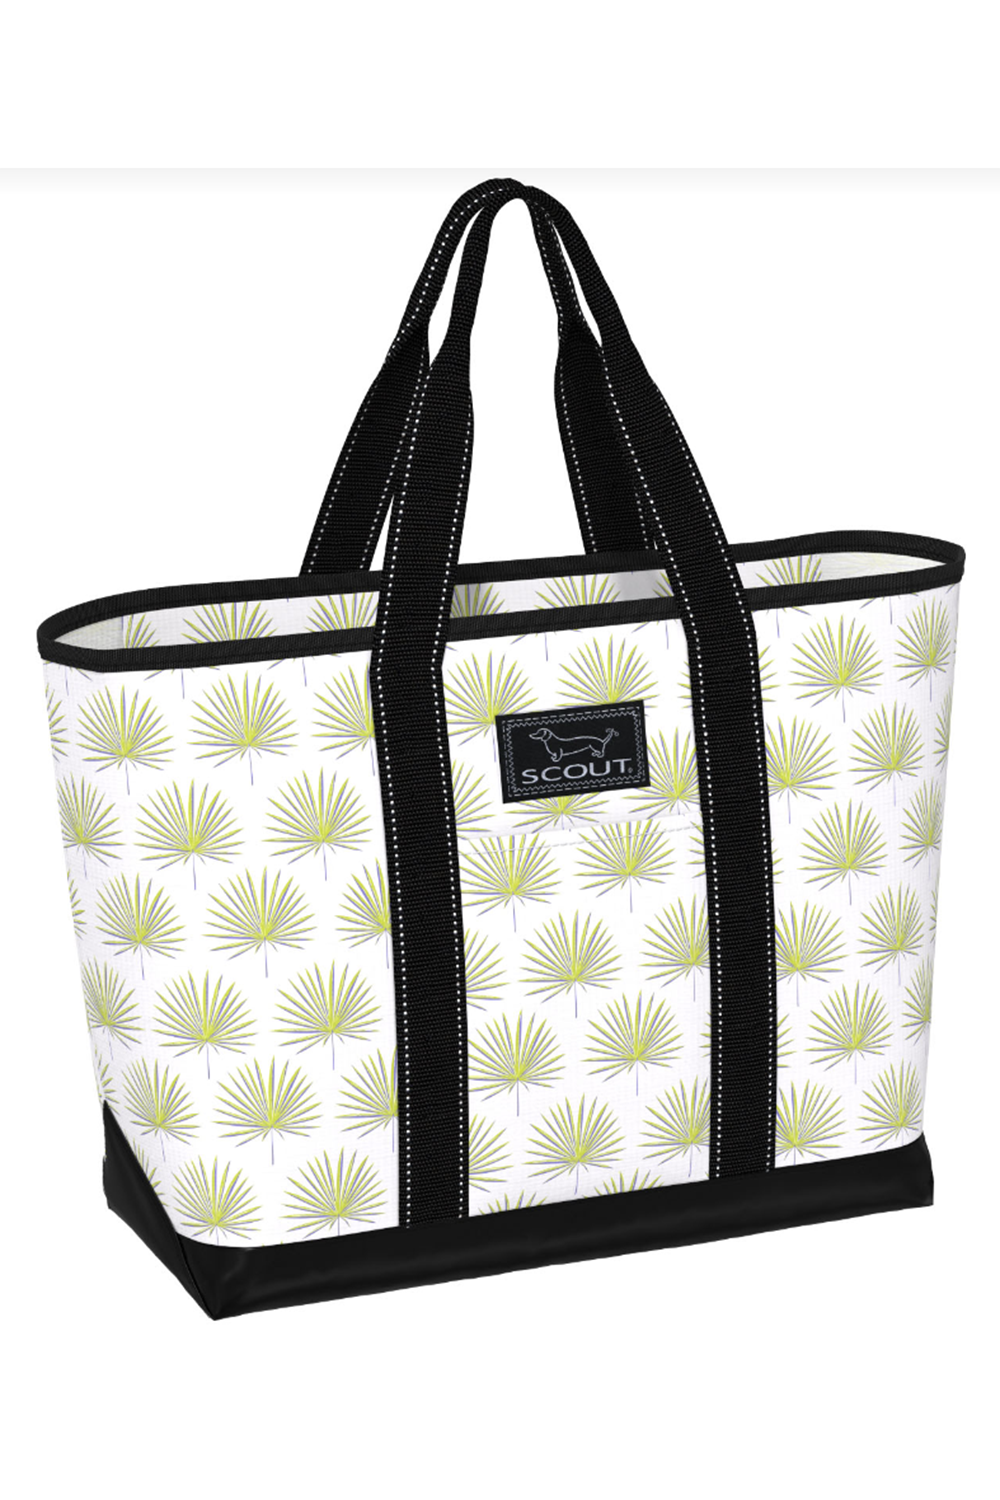 La Bumba Tote Bag - "Fronds with Benefits" SP24